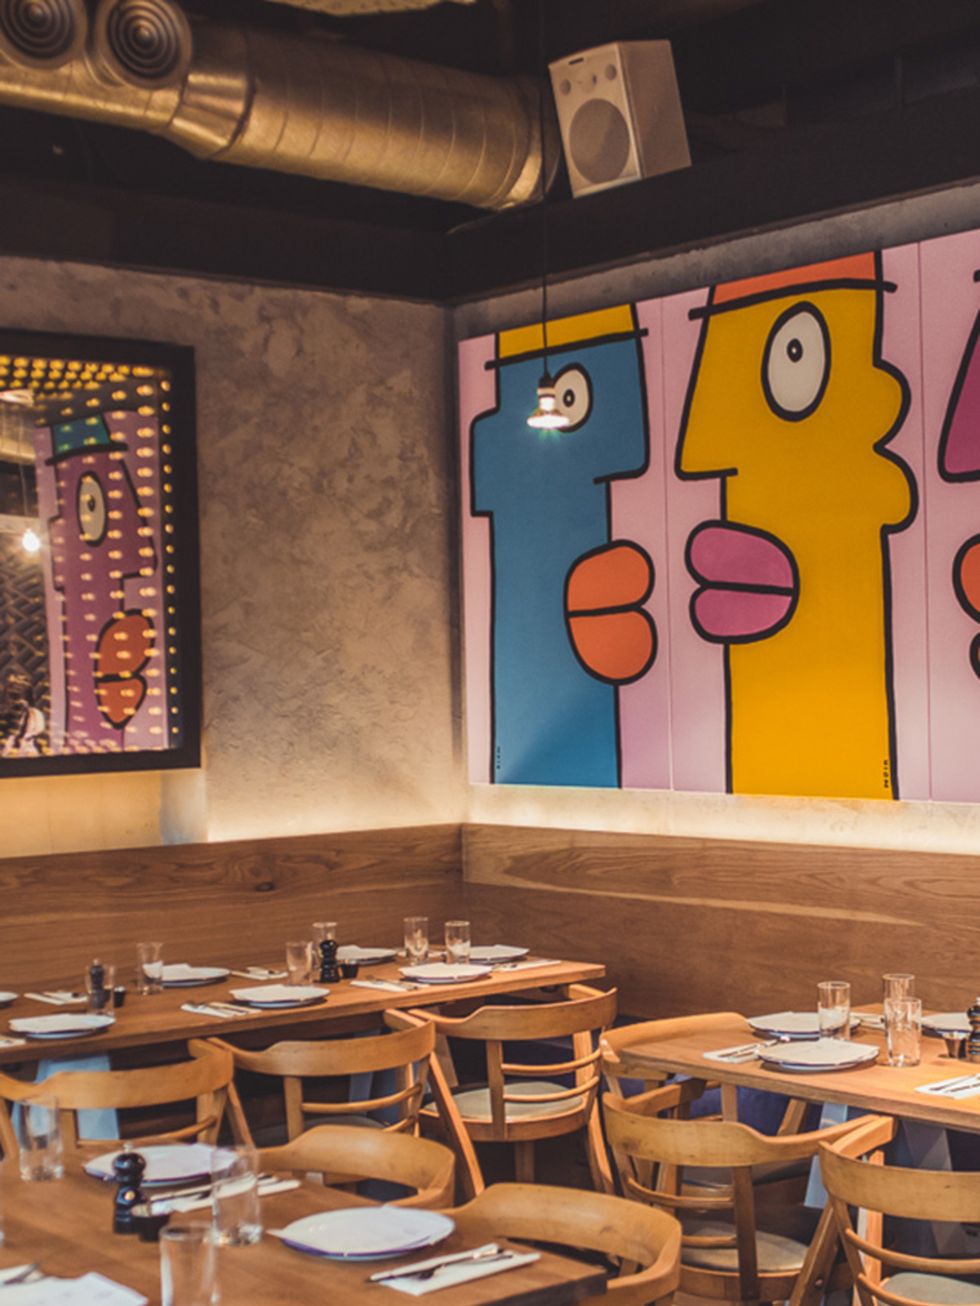 <p>FOOD: Smokey Tails</p>

<p>Like BBQ? Like beats? Like bars? Well, our alliteration-loving friend, allow us to direct you to new Hoxton Square restaurant Smokey Tails, where youll find all three. Run by DJ Seth Troxler, it seems not only does this guy 